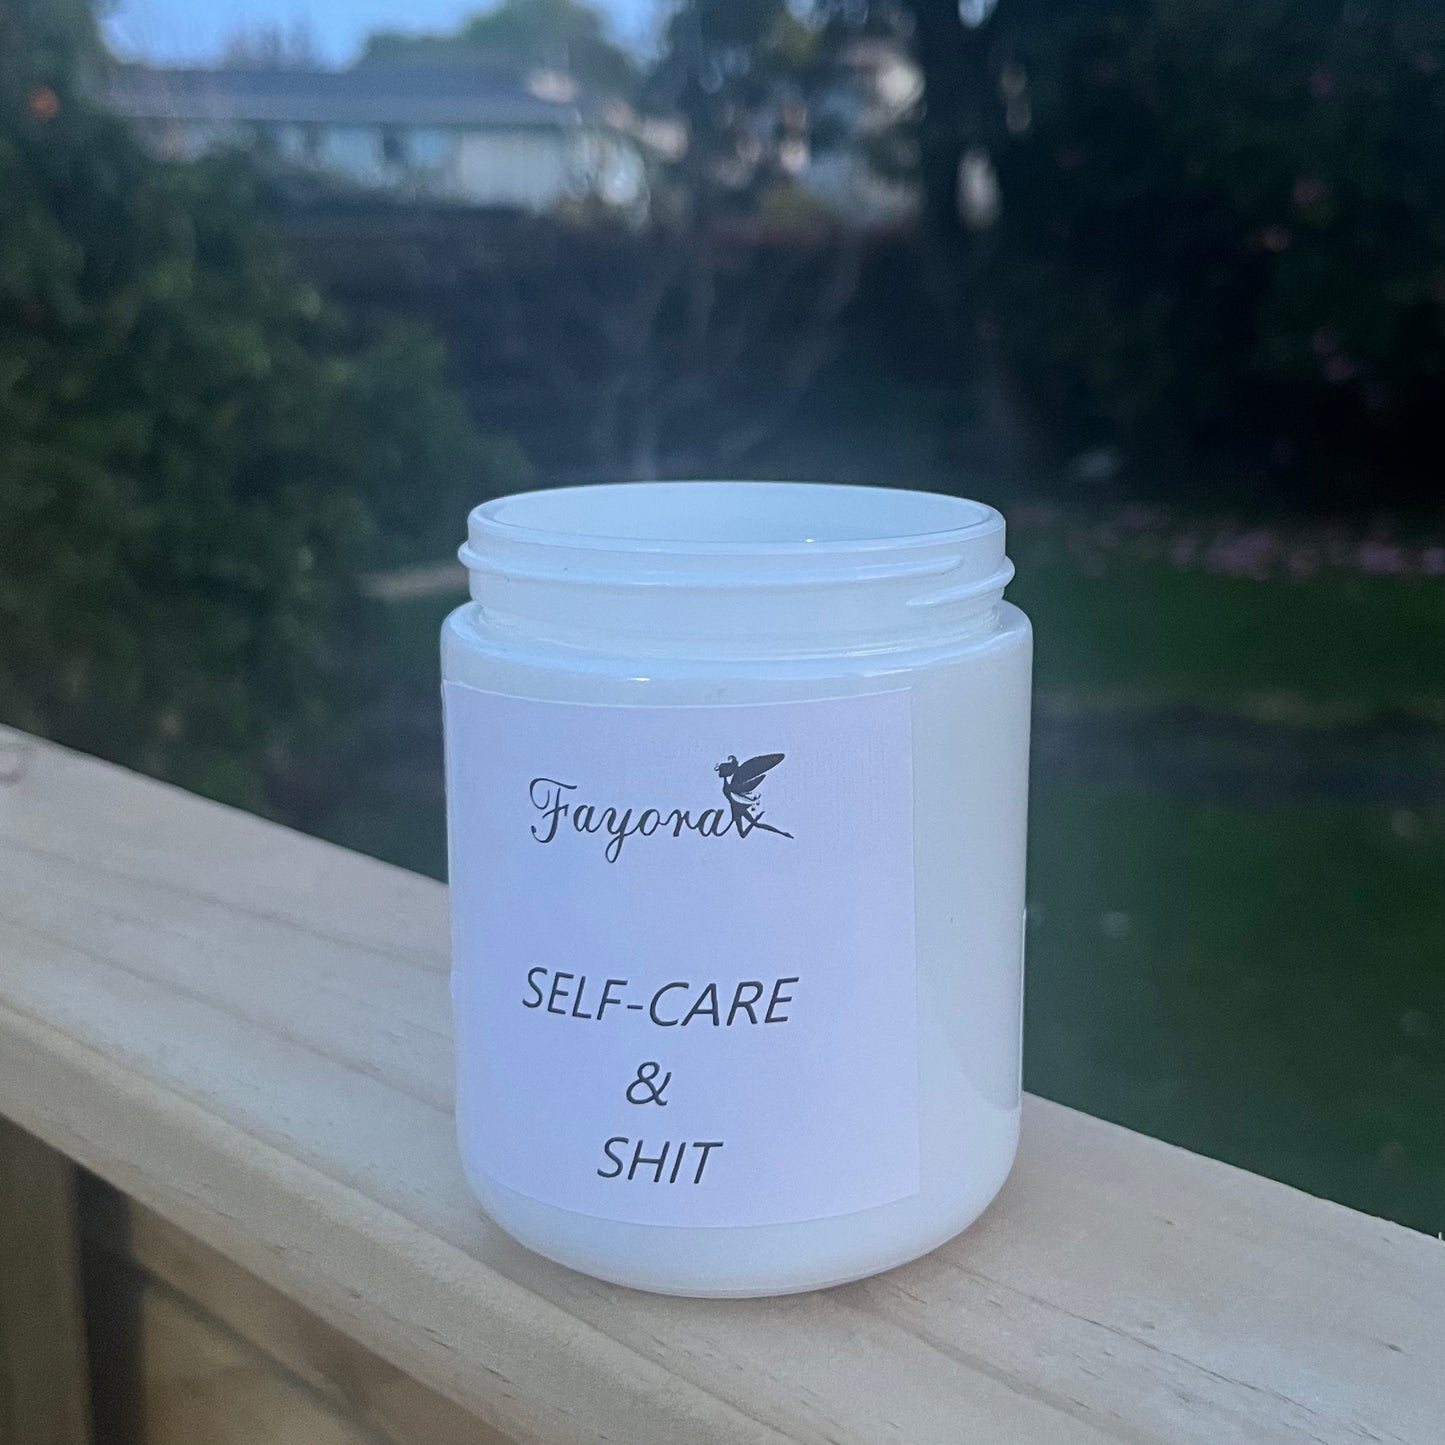 “Self-Care & Shit” Candle